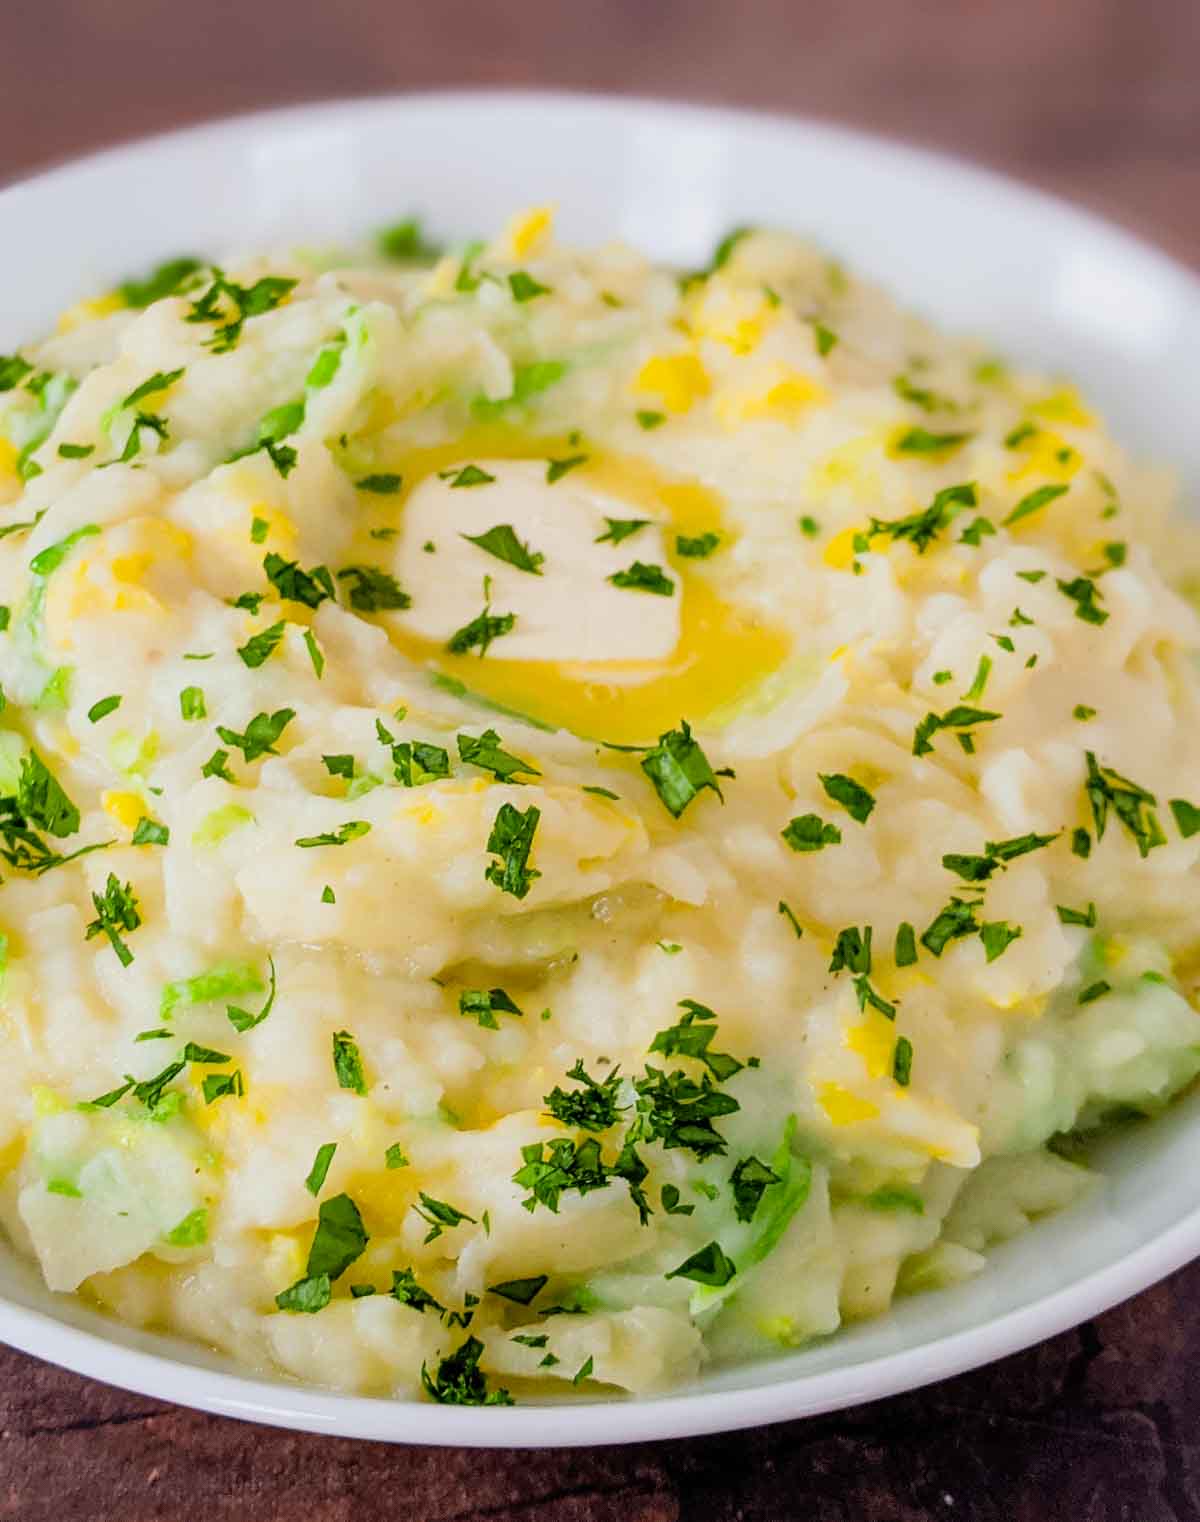 Irish mashed potatoes with butter and parsley.